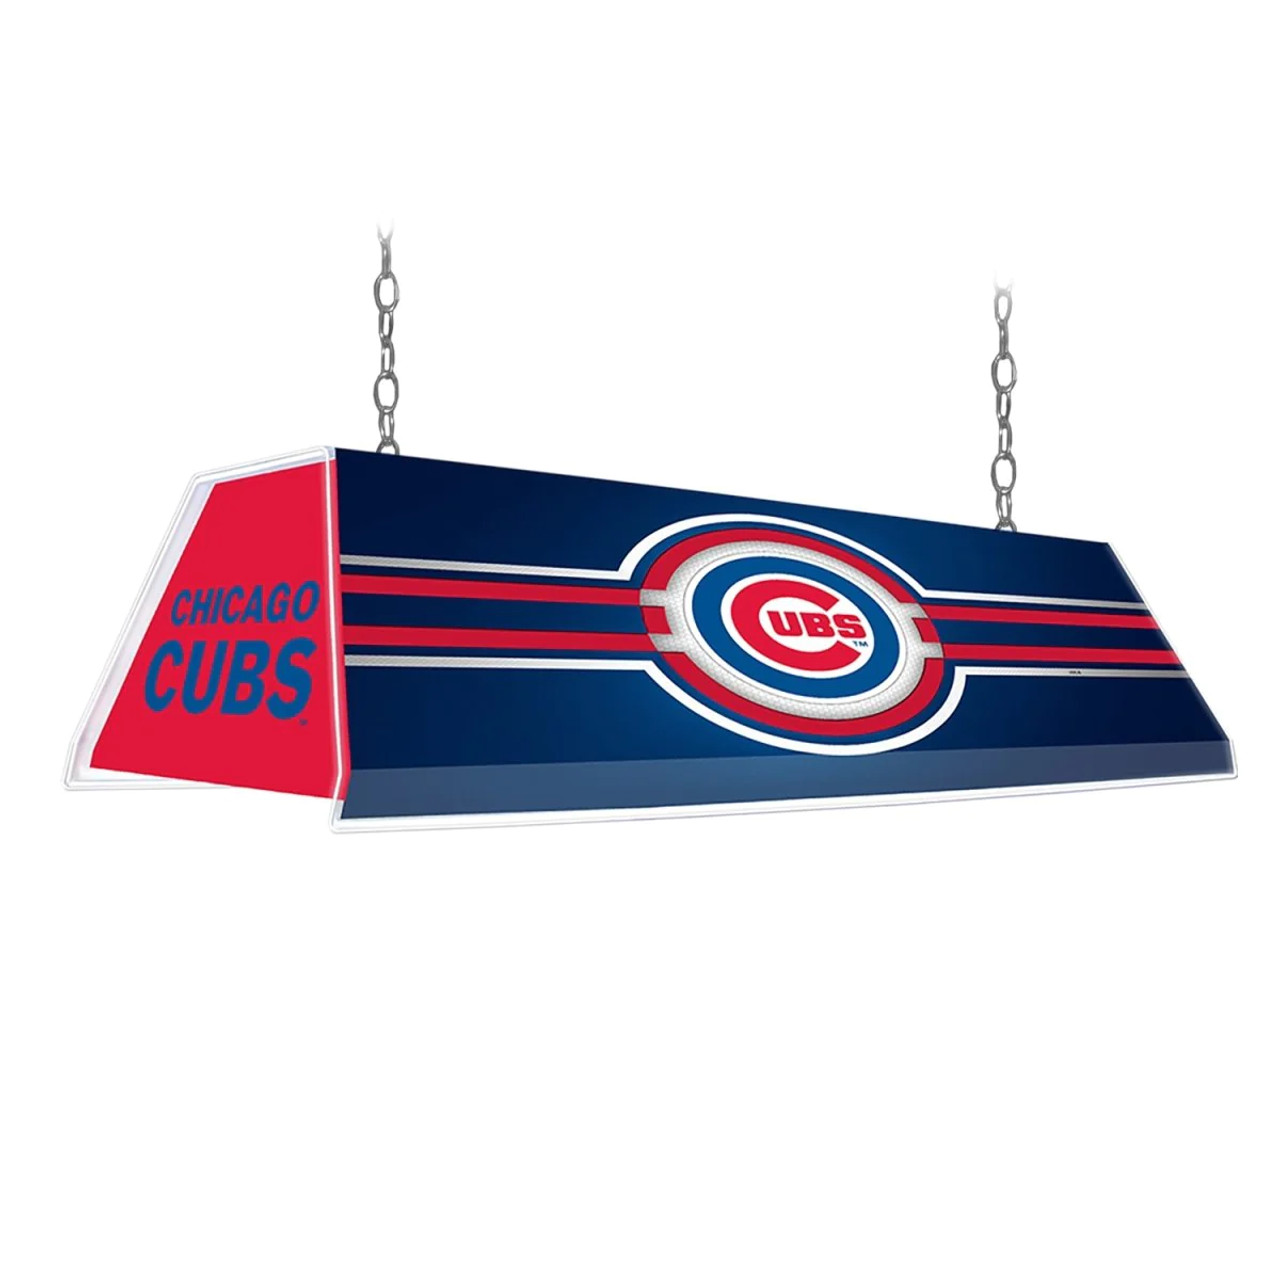 MBCUBS-320-01A, Chicago, CHI, Cubs, Cubbies, Edge Glow, Billiard, Pool, Table, Light, Lamo, "A" Version, MLB, The Fan-Brand, 704384966951